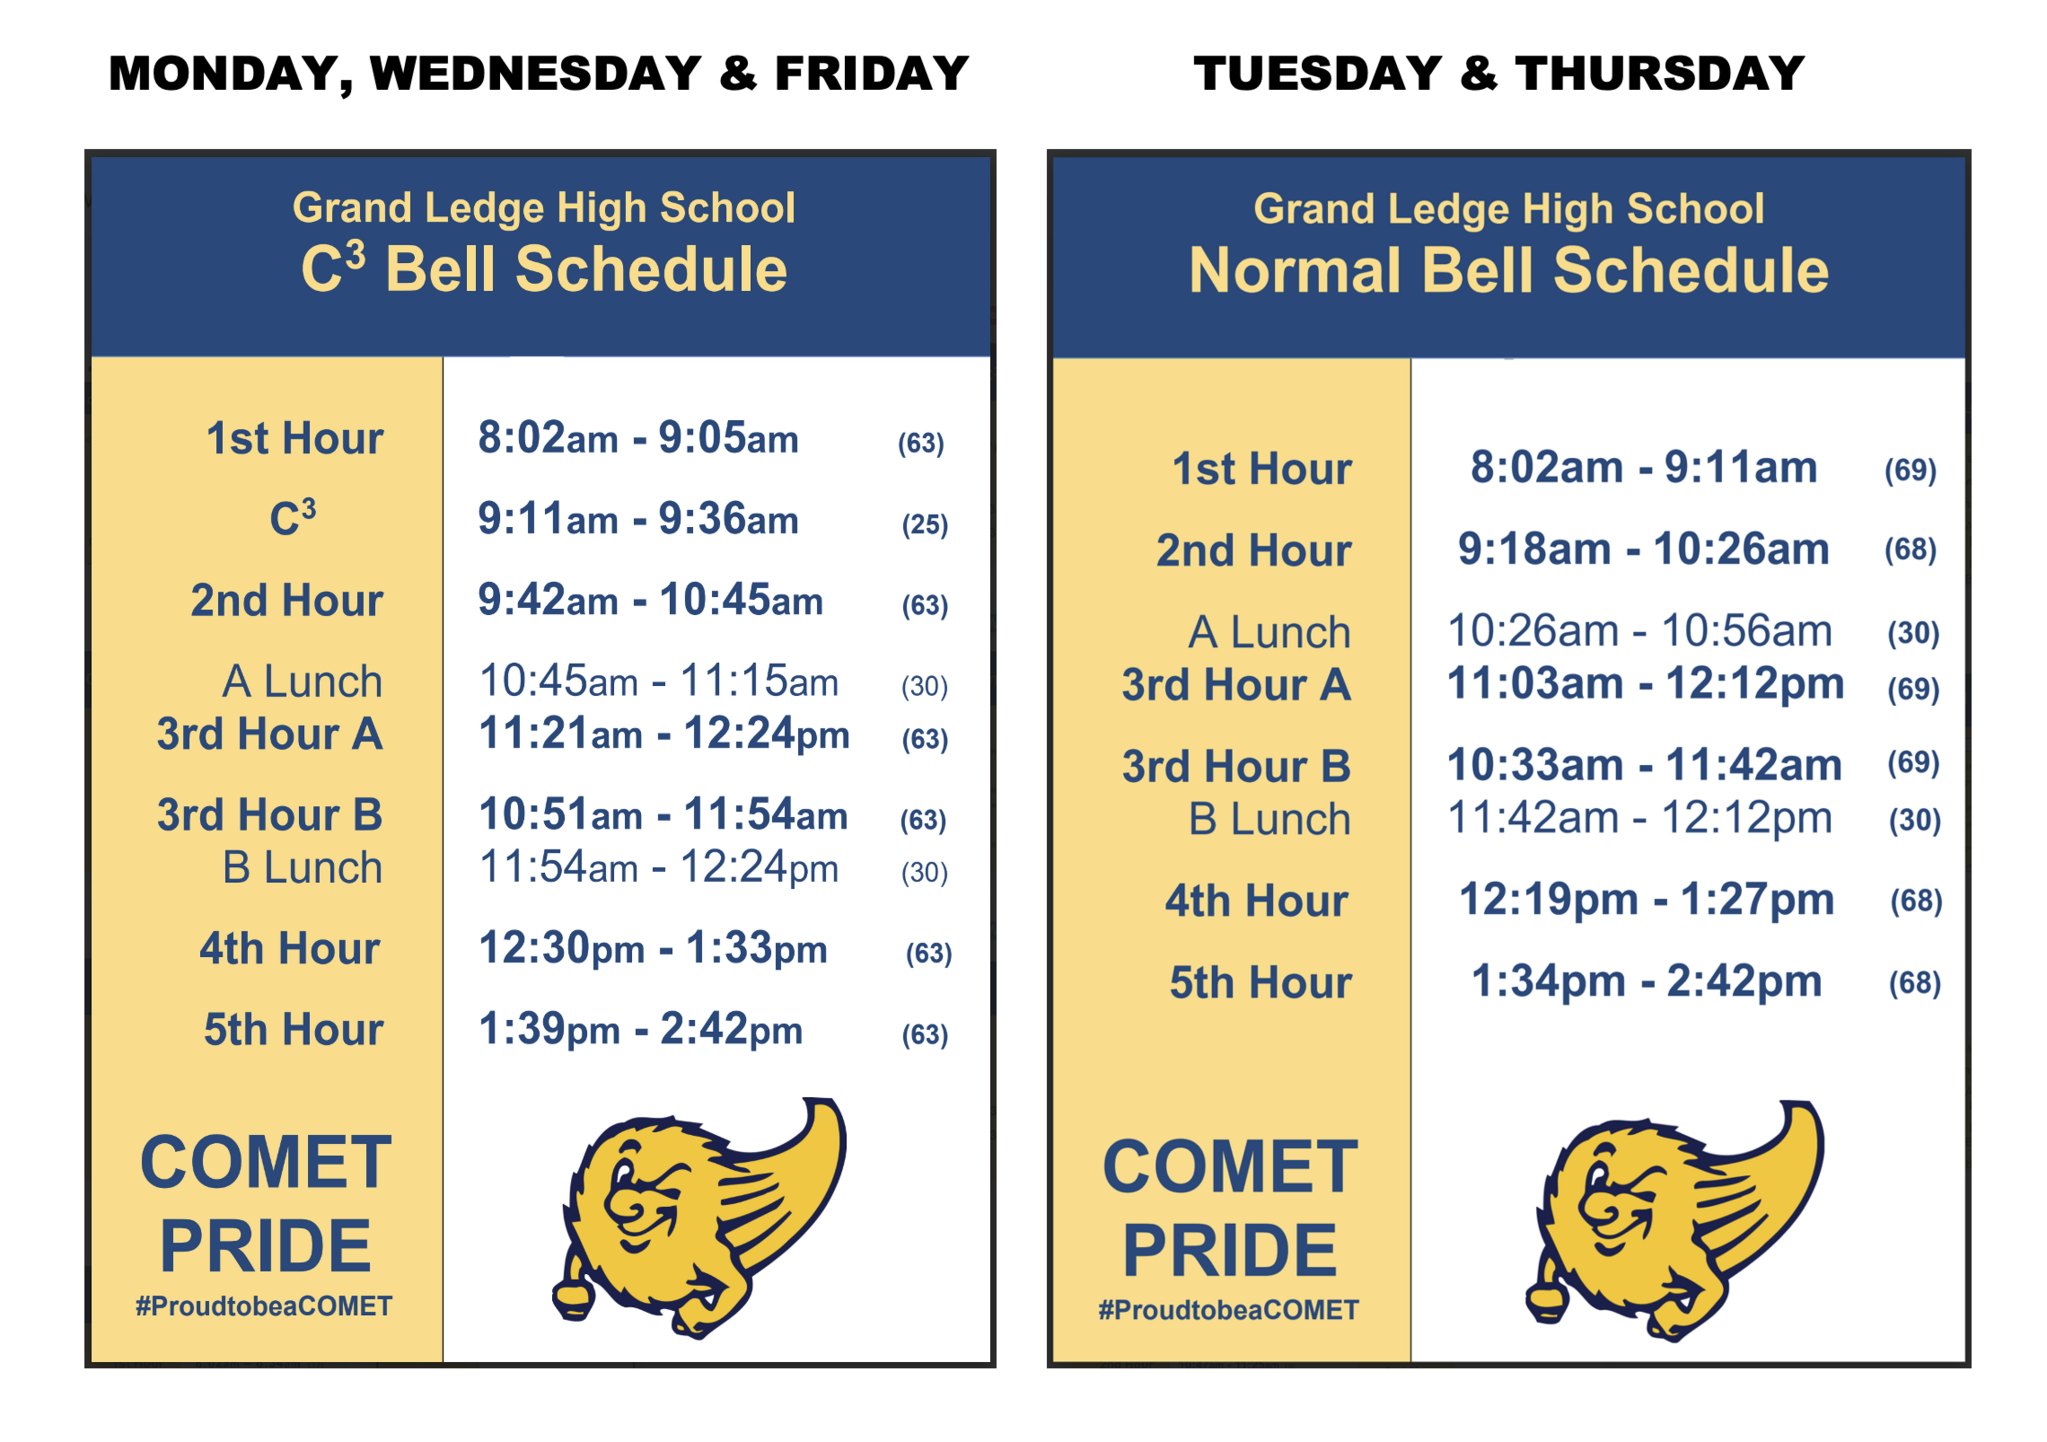 C3 and Normal Bell Schedule